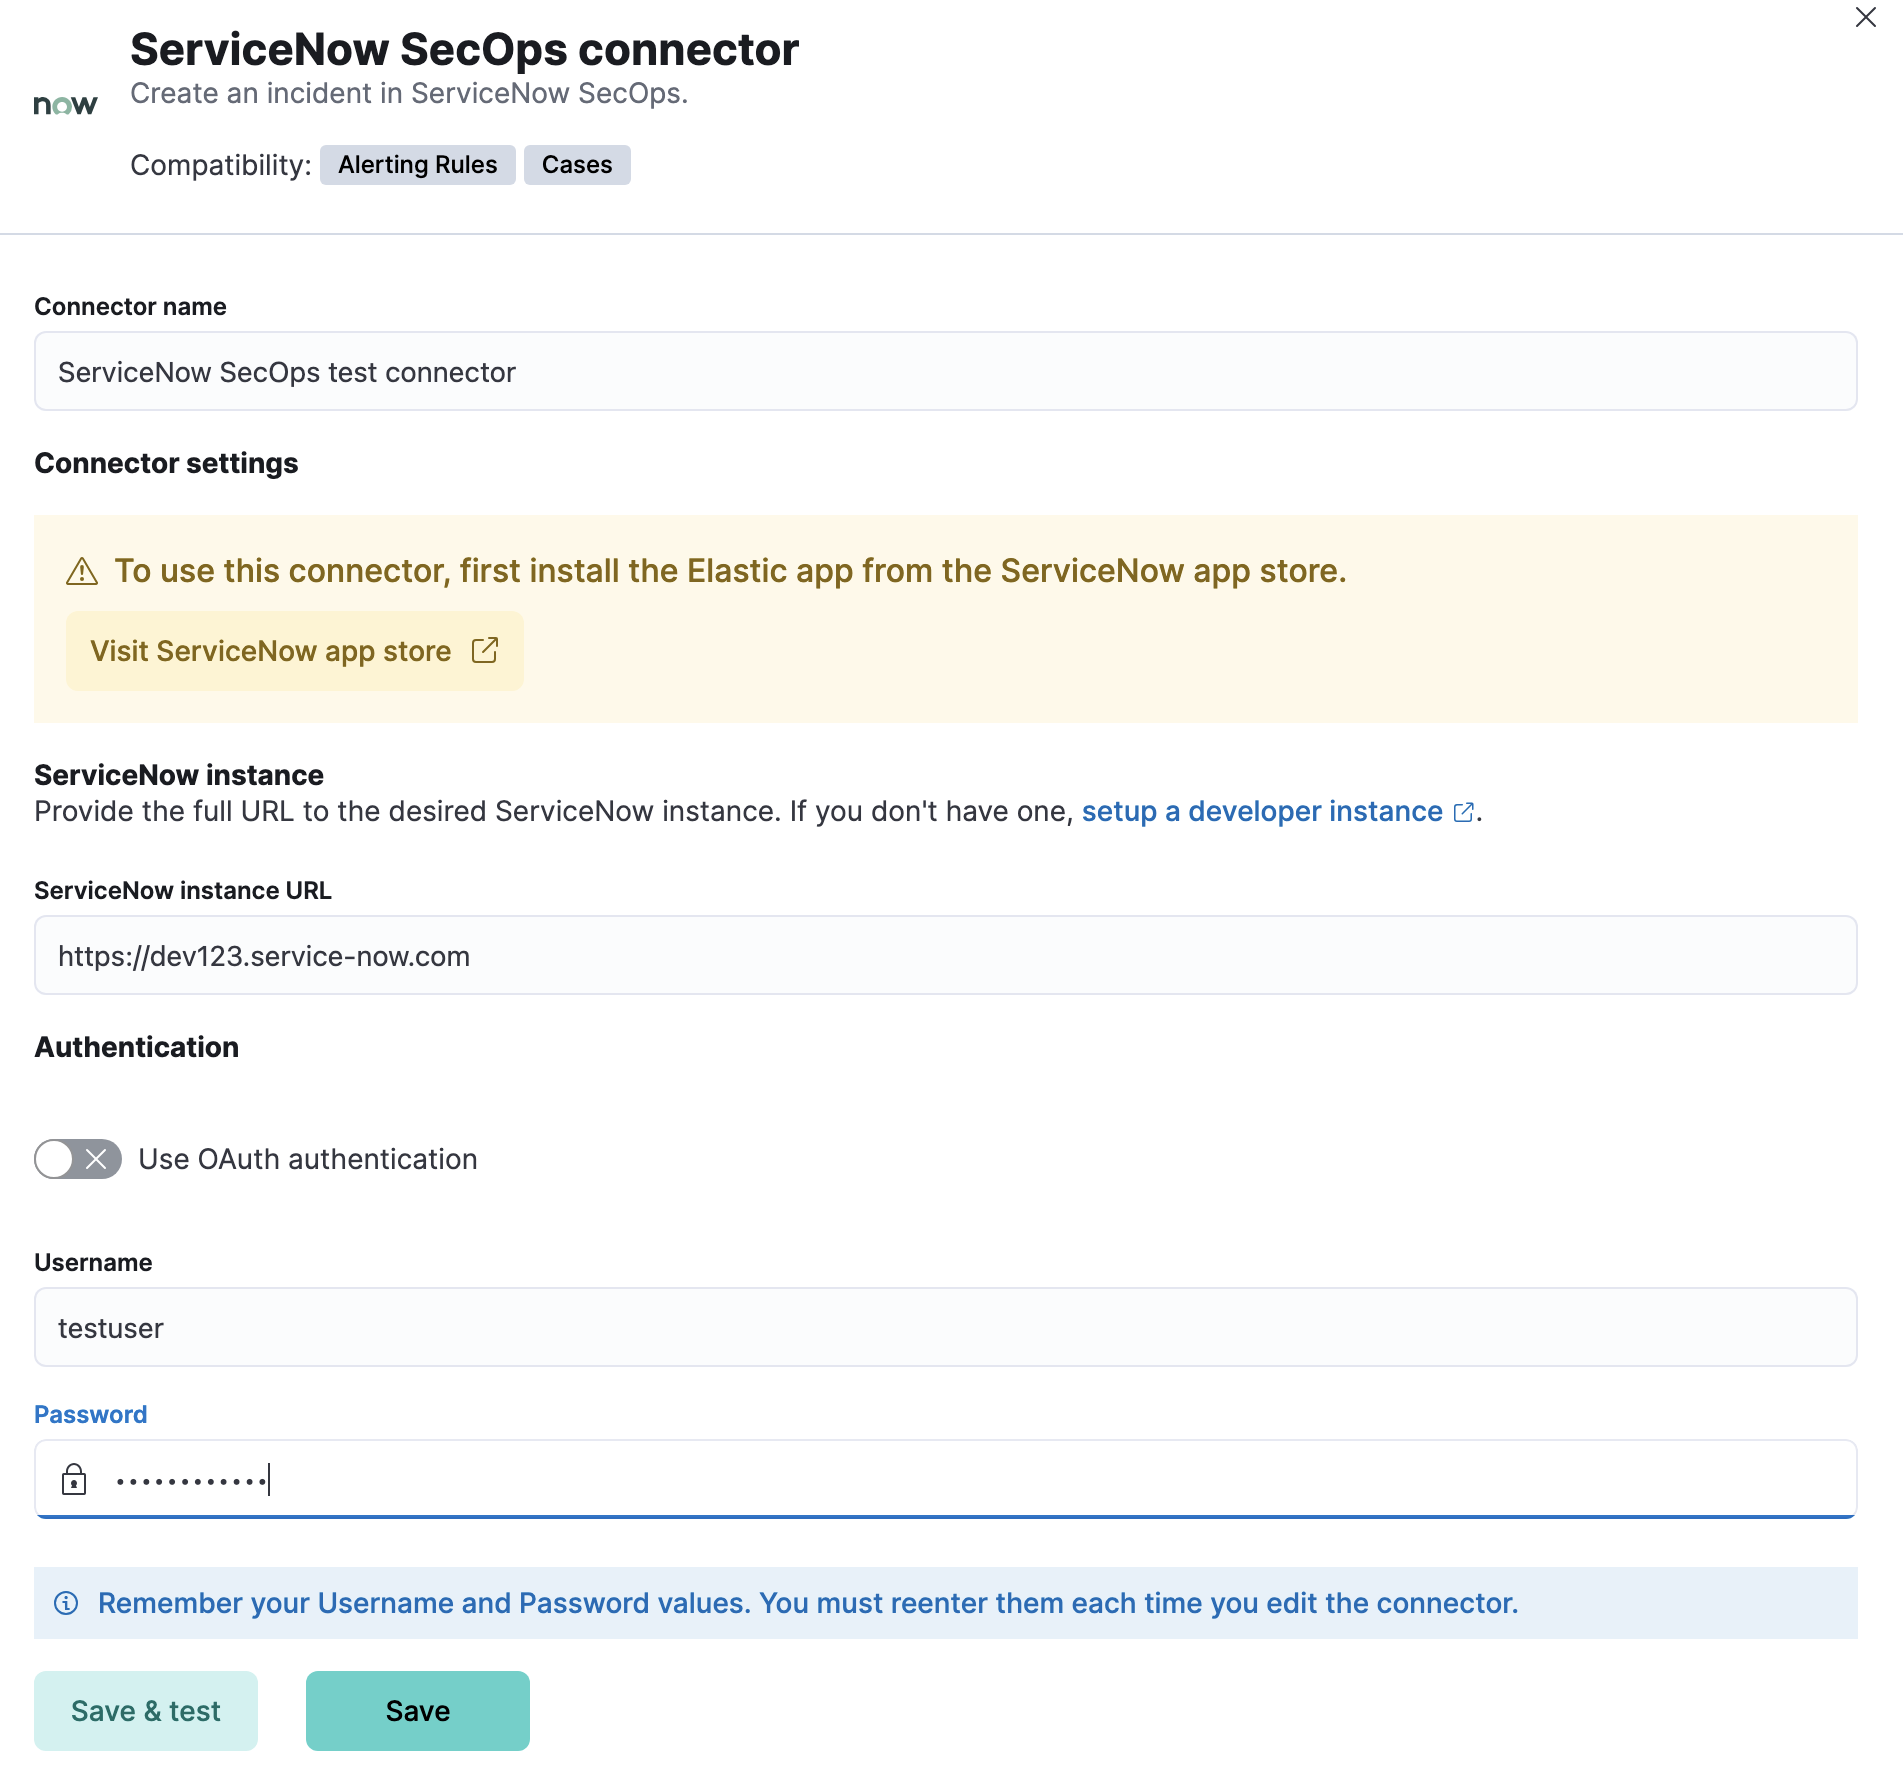 ServiceNow SecOps connector using basic auth